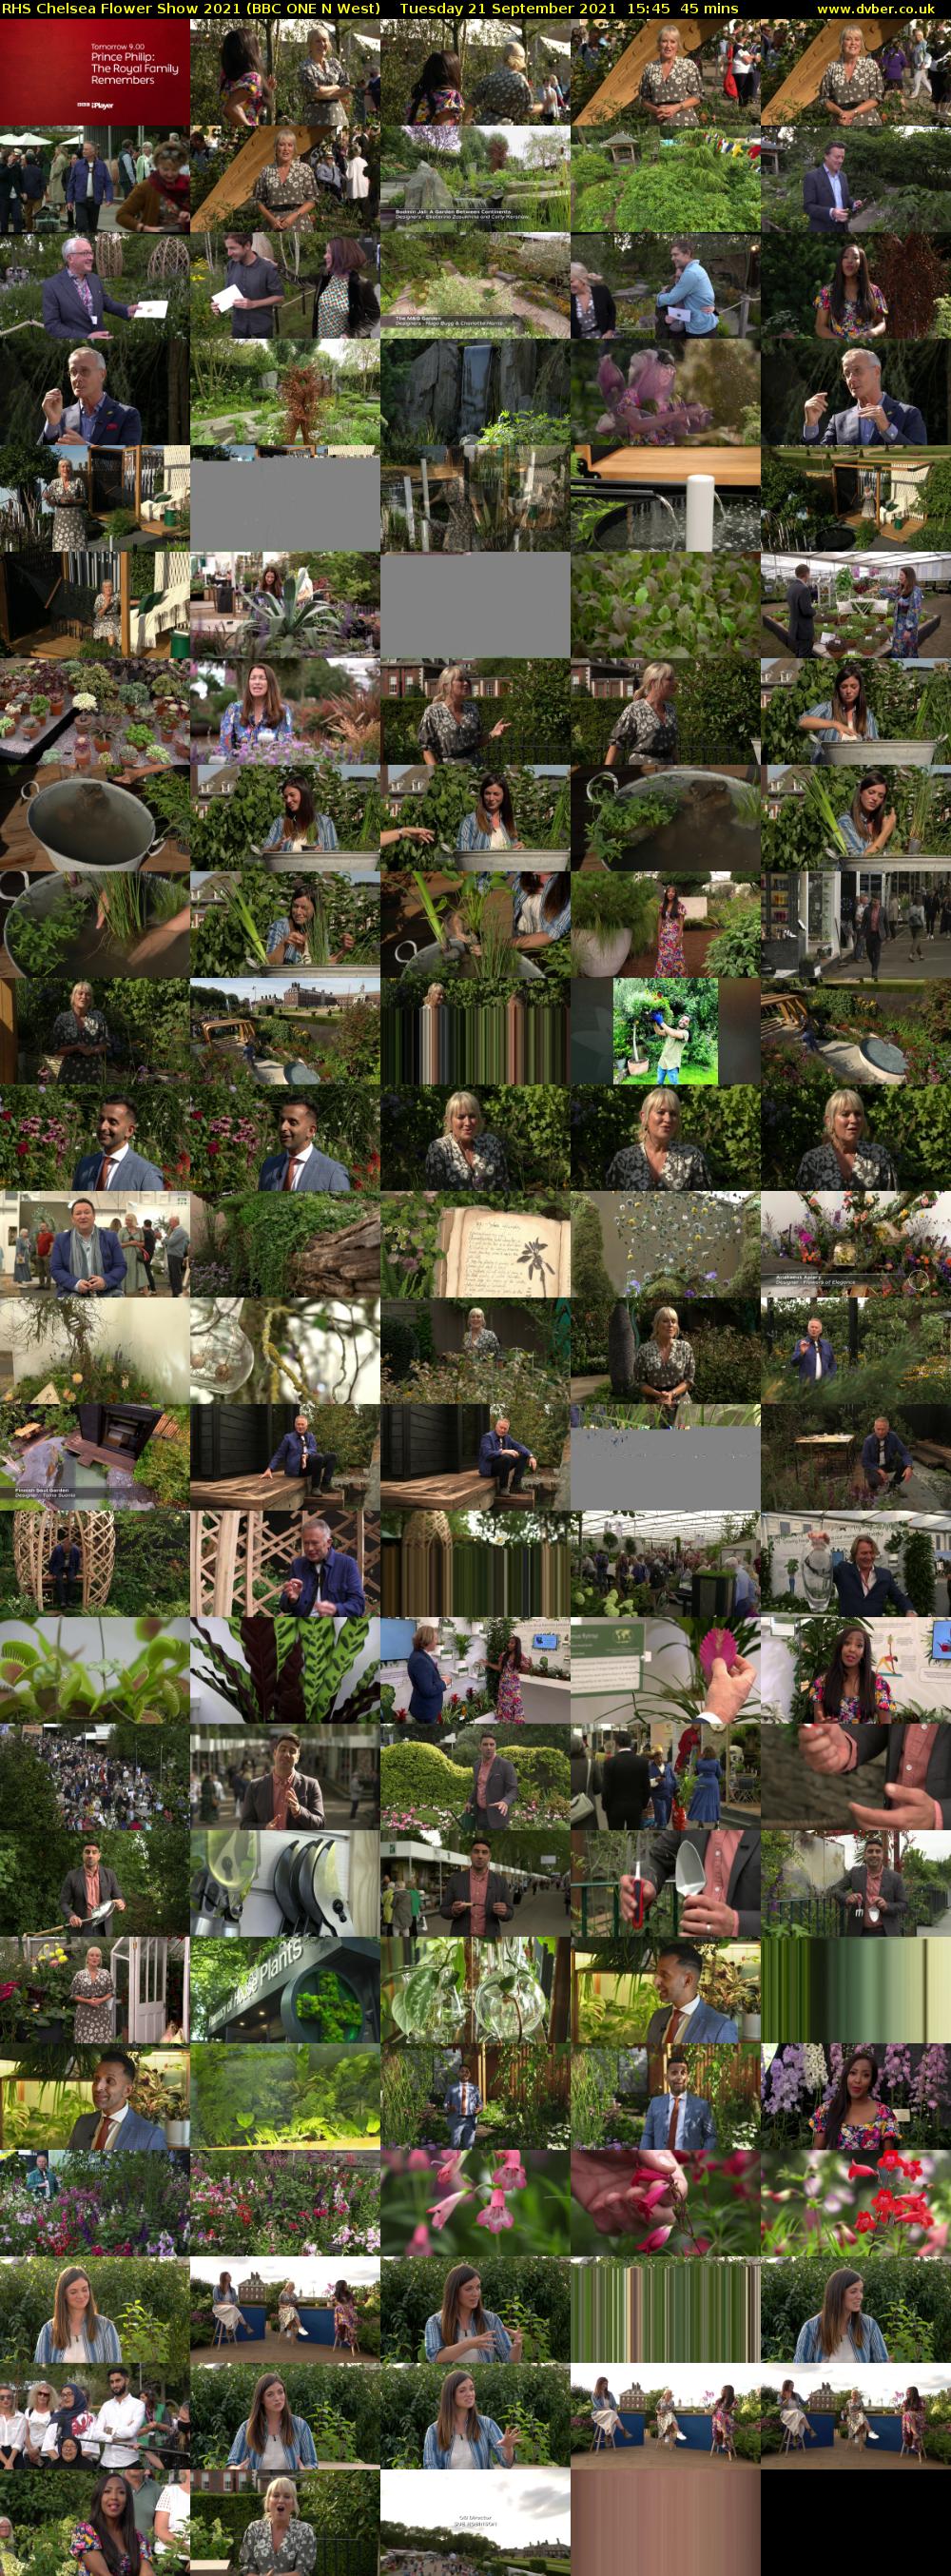 RHS Chelsea Flower Show 2021 (BBC ONE N West) Tuesday 21 September 2021 15:45 - 16:30